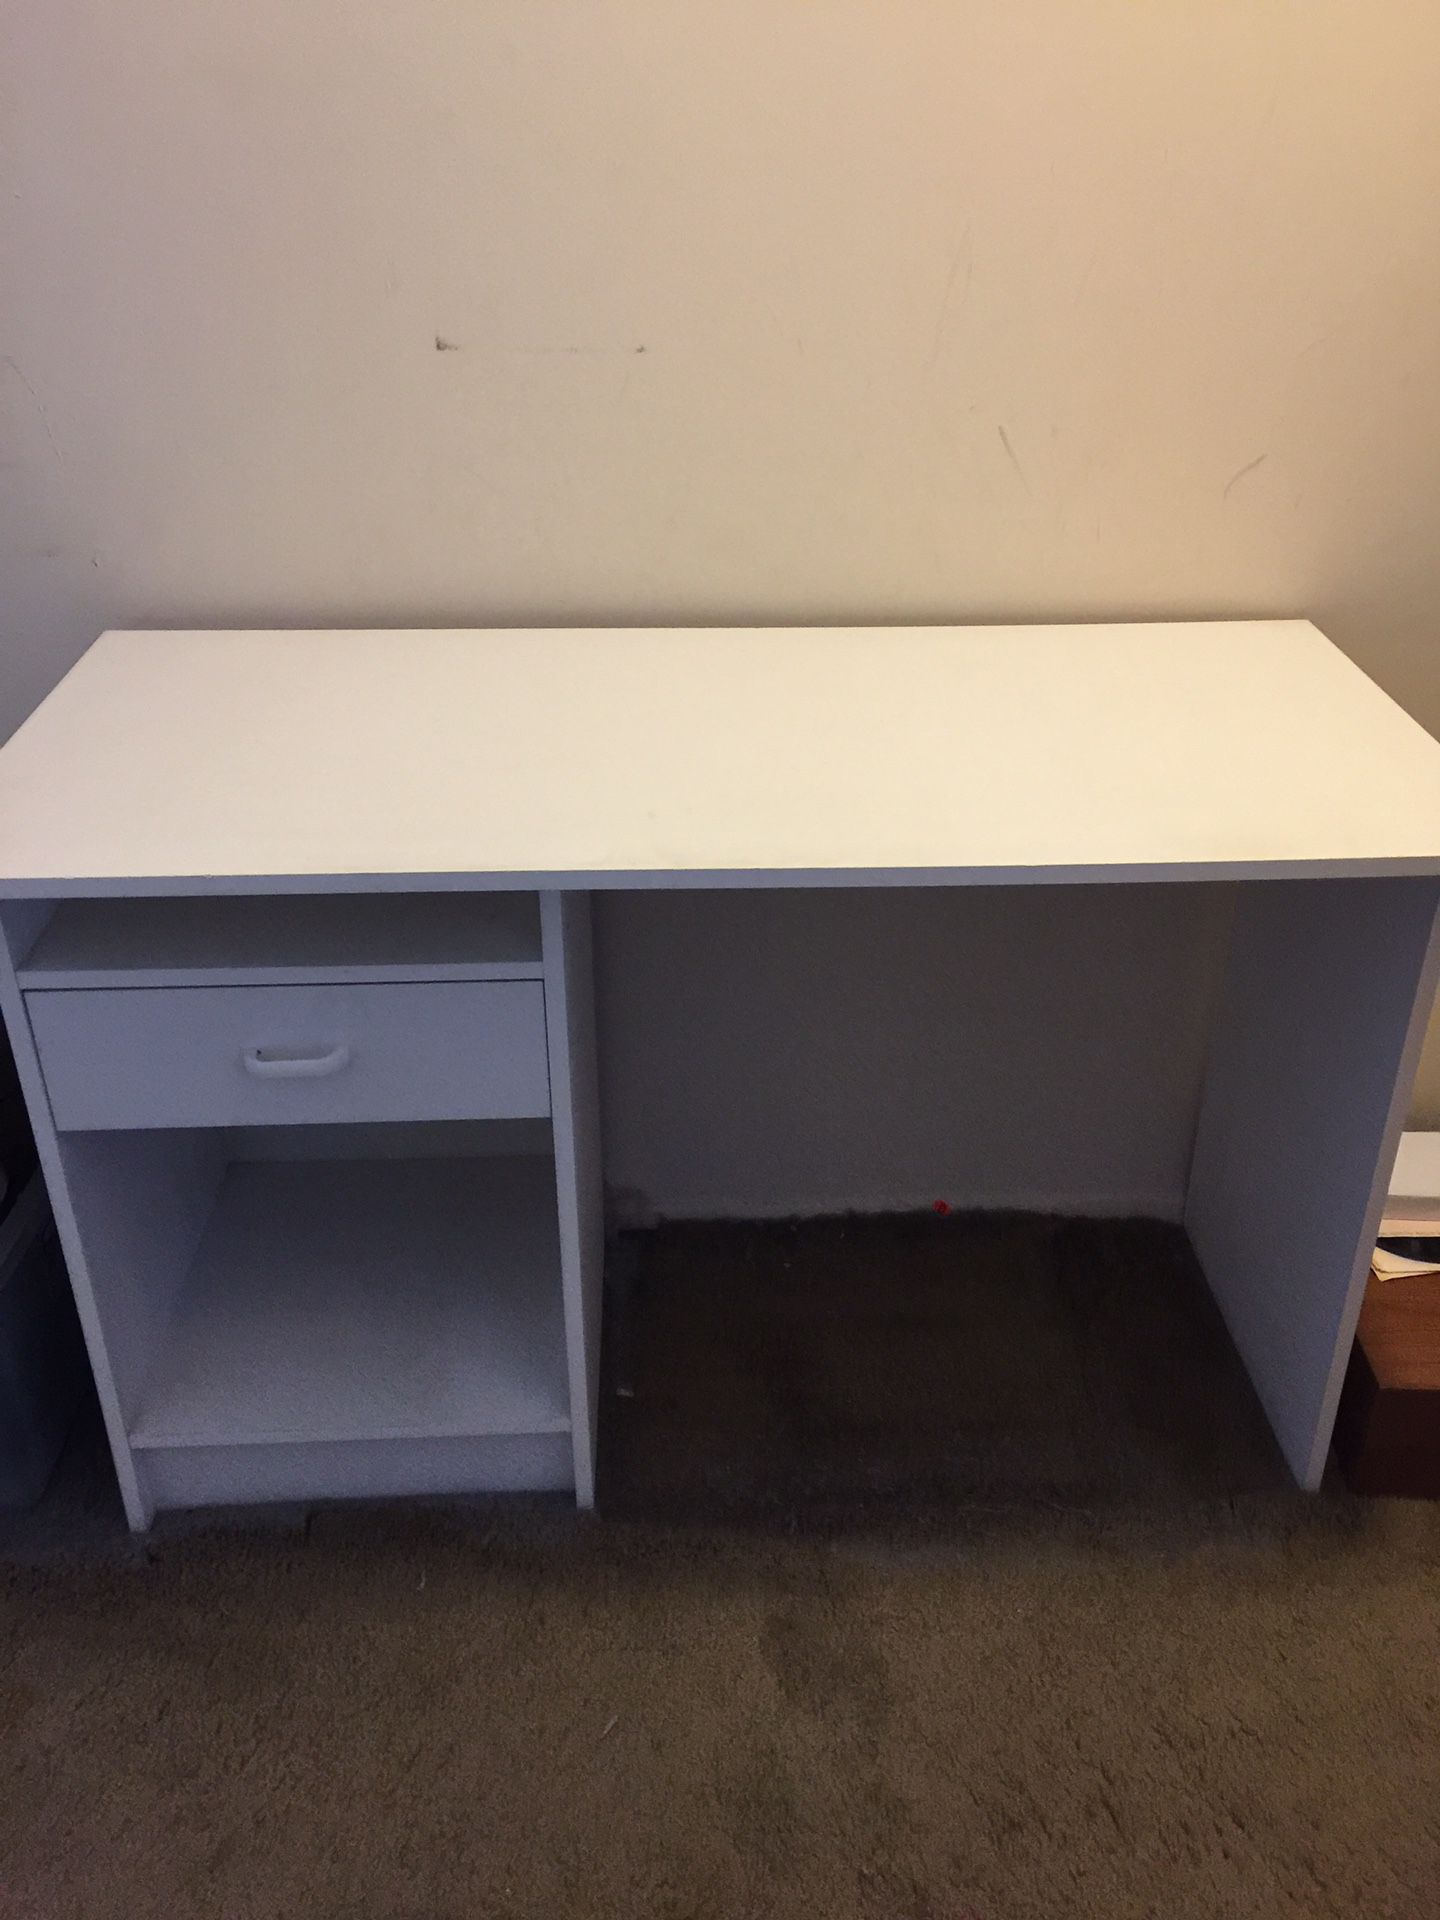 Student desk. No chair. Located in College Park, MD. Off Kenilworth Avenue.